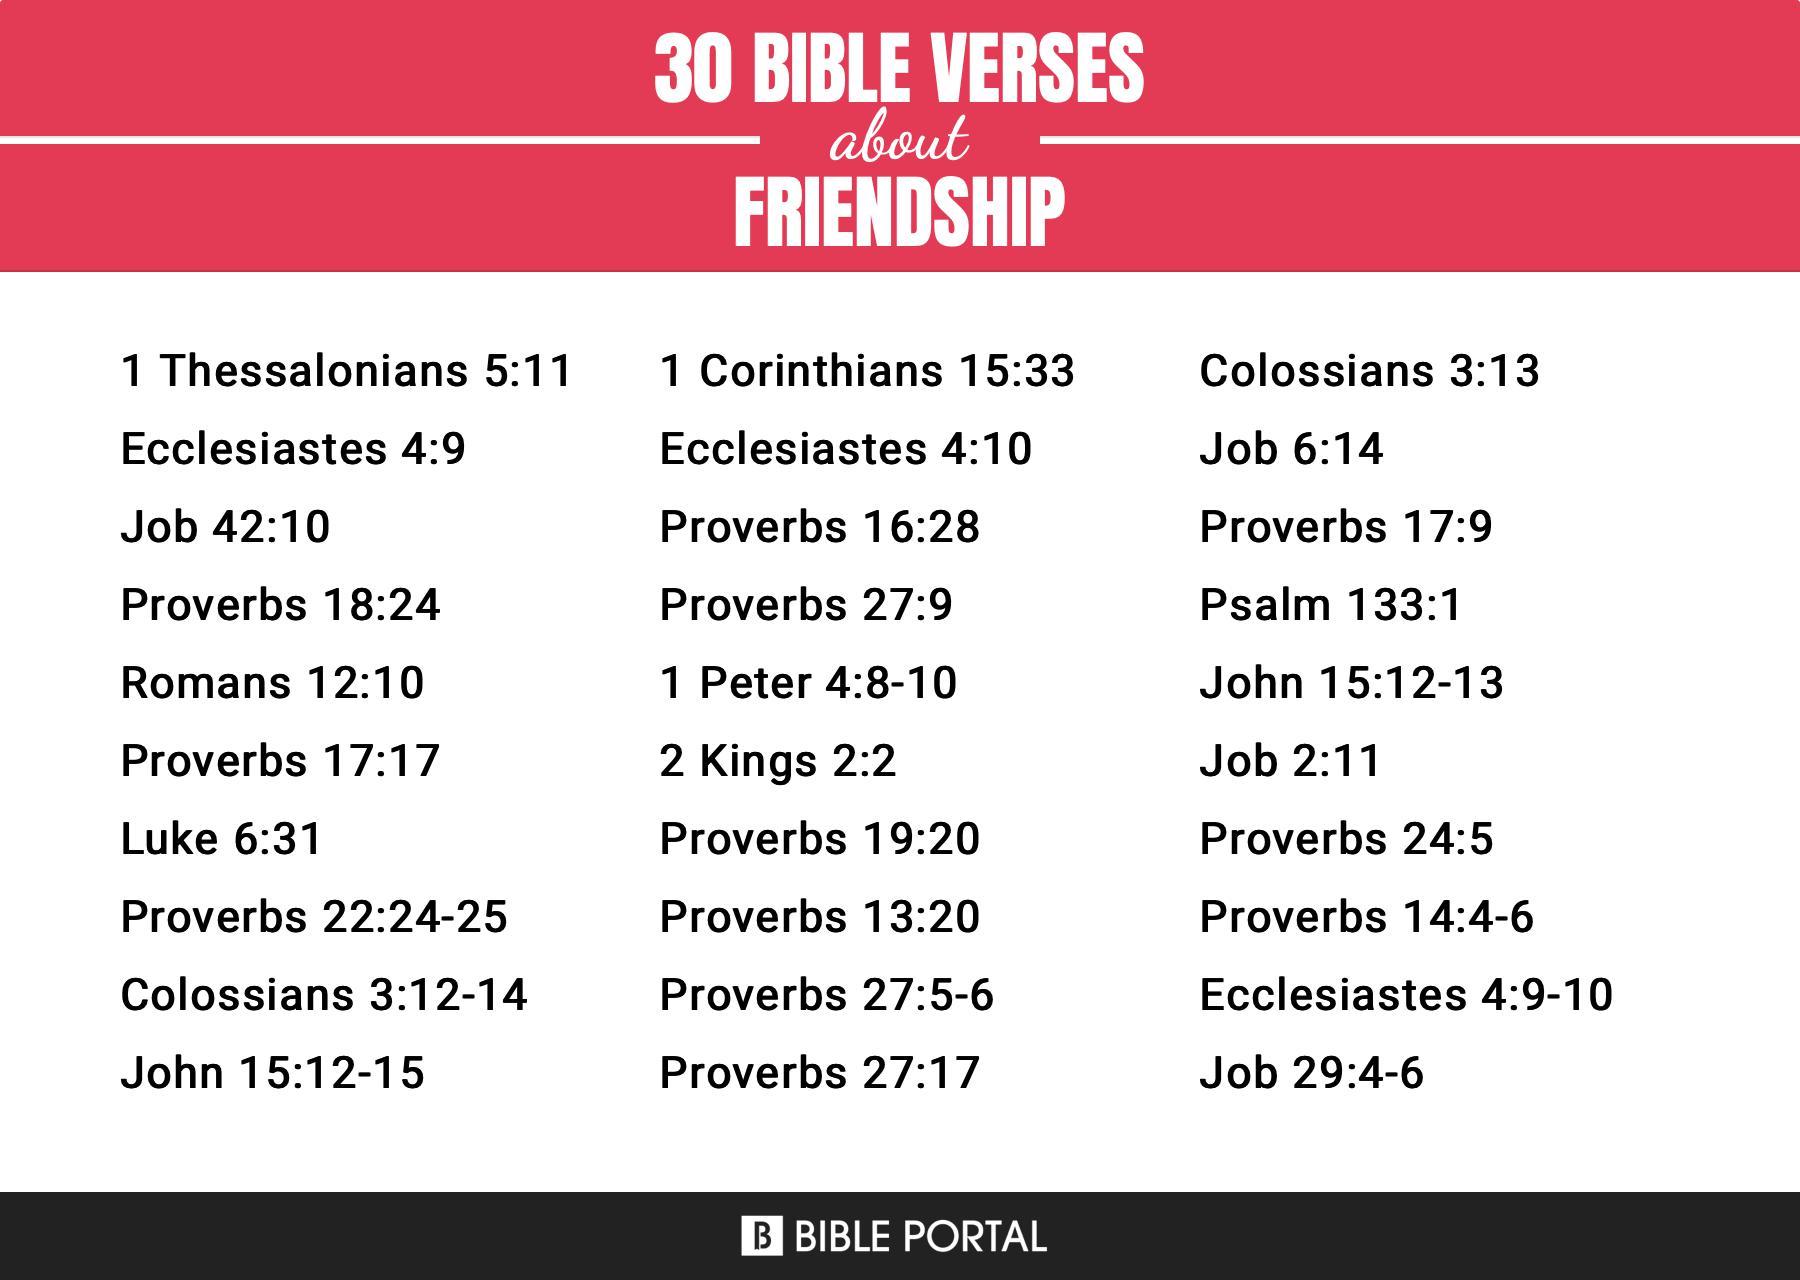 What Does the Bible Say about Friendship?